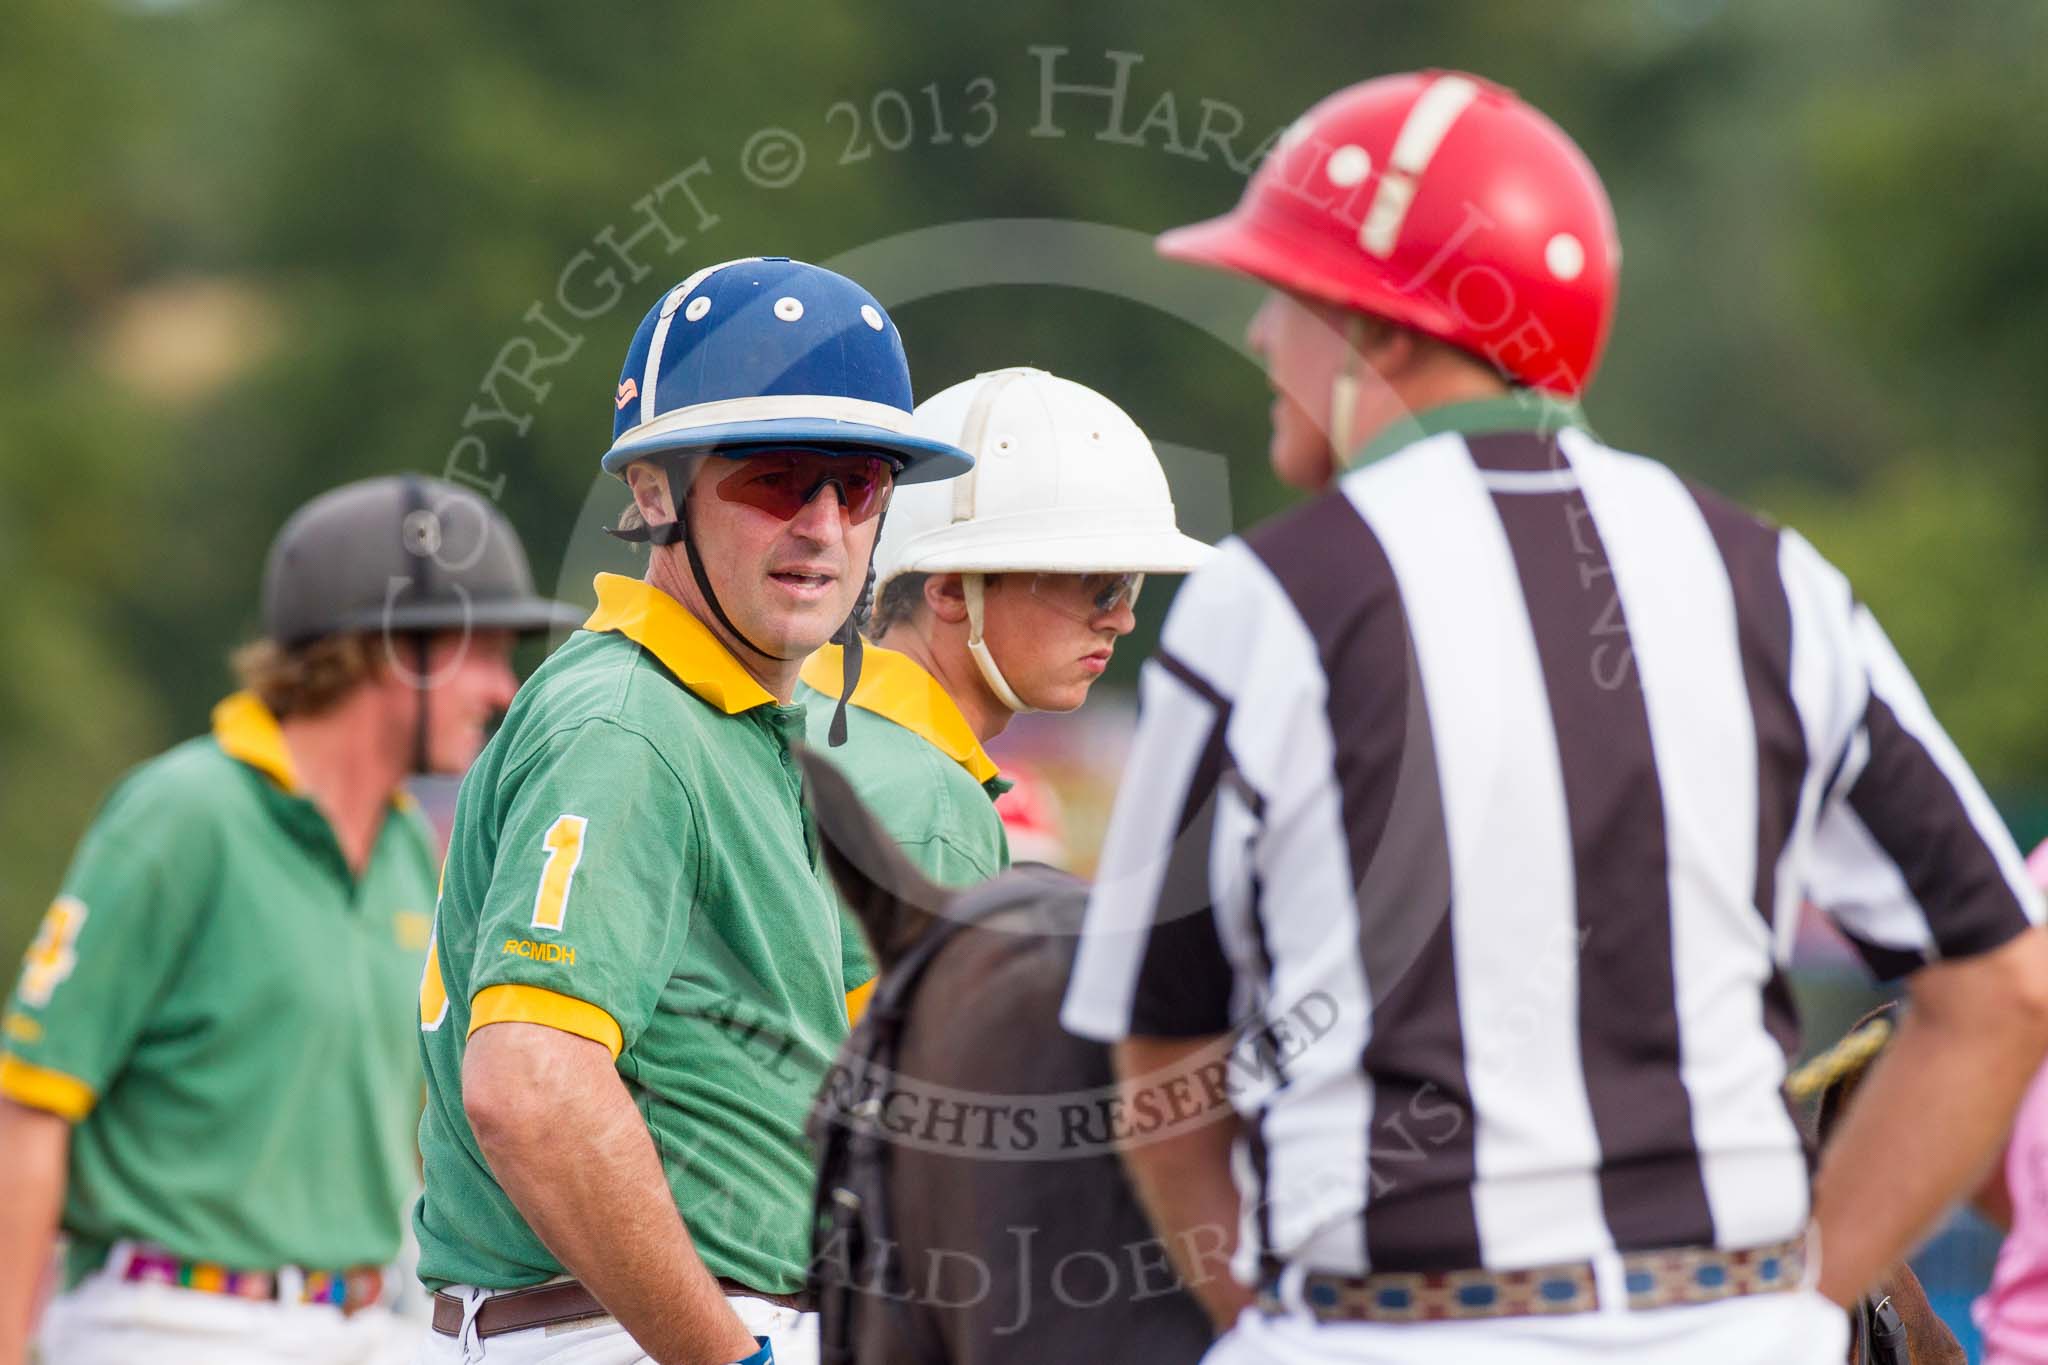 DBPC Polo in the Park 2013, Final of the Tusk Trophy (4 Goals), Rutland vs C.A.N.I..
Dallas Burston Polo Club, ,
Southam,
Warwickshire,
United Kingdom,
on 01 September 2013 at 16:23, image #562